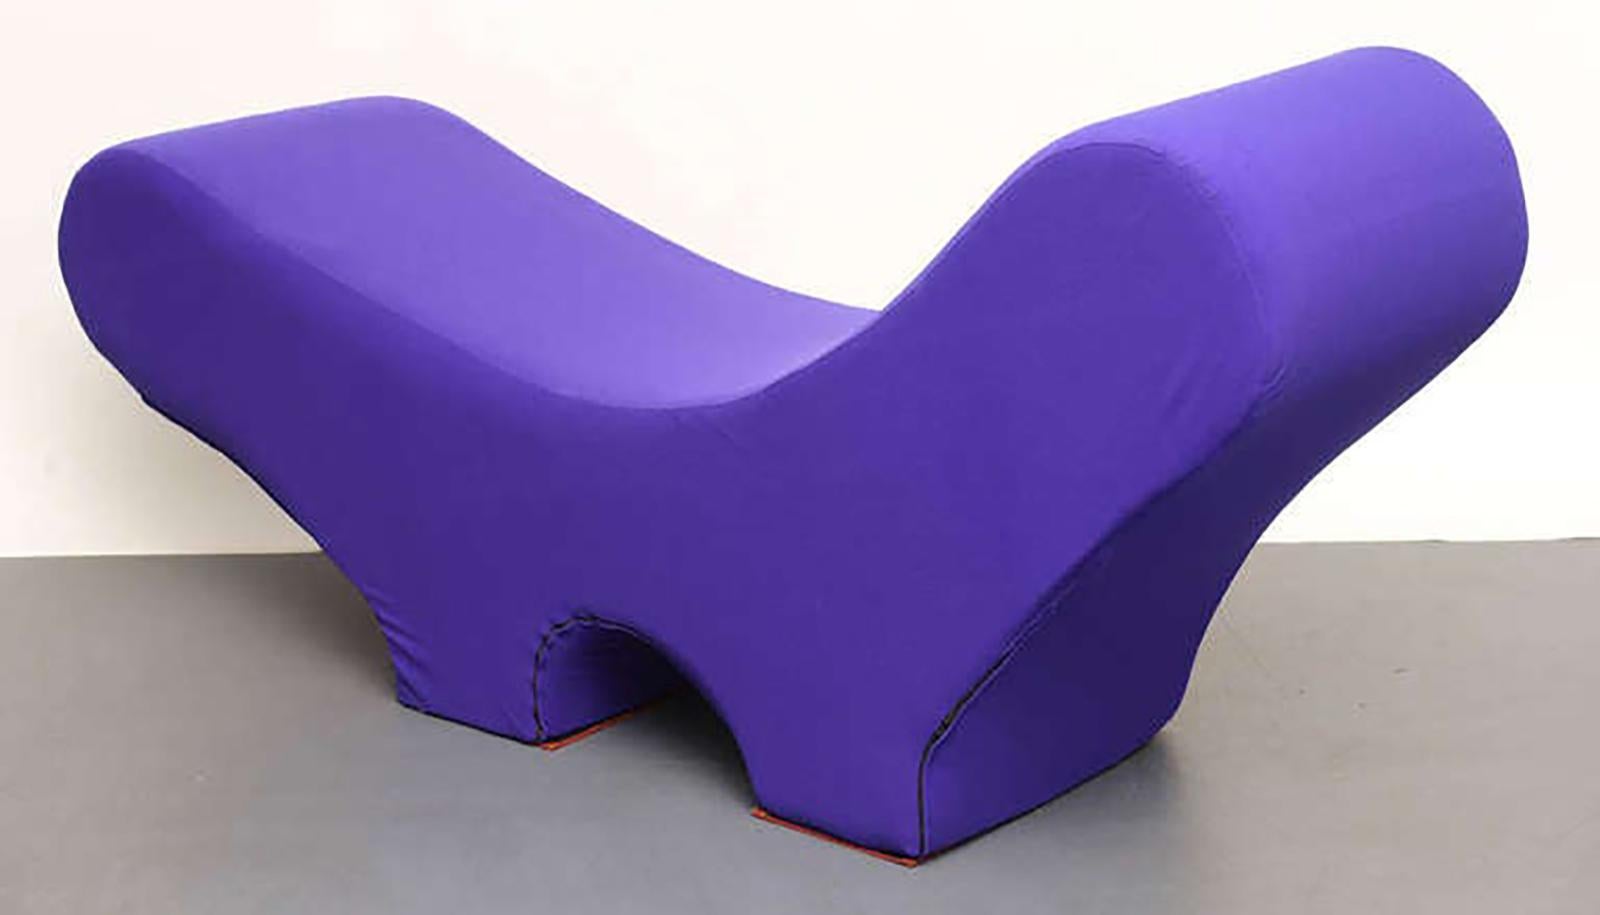 Long lounge chair , day bed extremly comfortable .
The color is great and will put a joyfull note in any interior.
The complete piece is in foam , the fabric is a bit more purple  than the color of the photo . Please, ask for more photos to have the